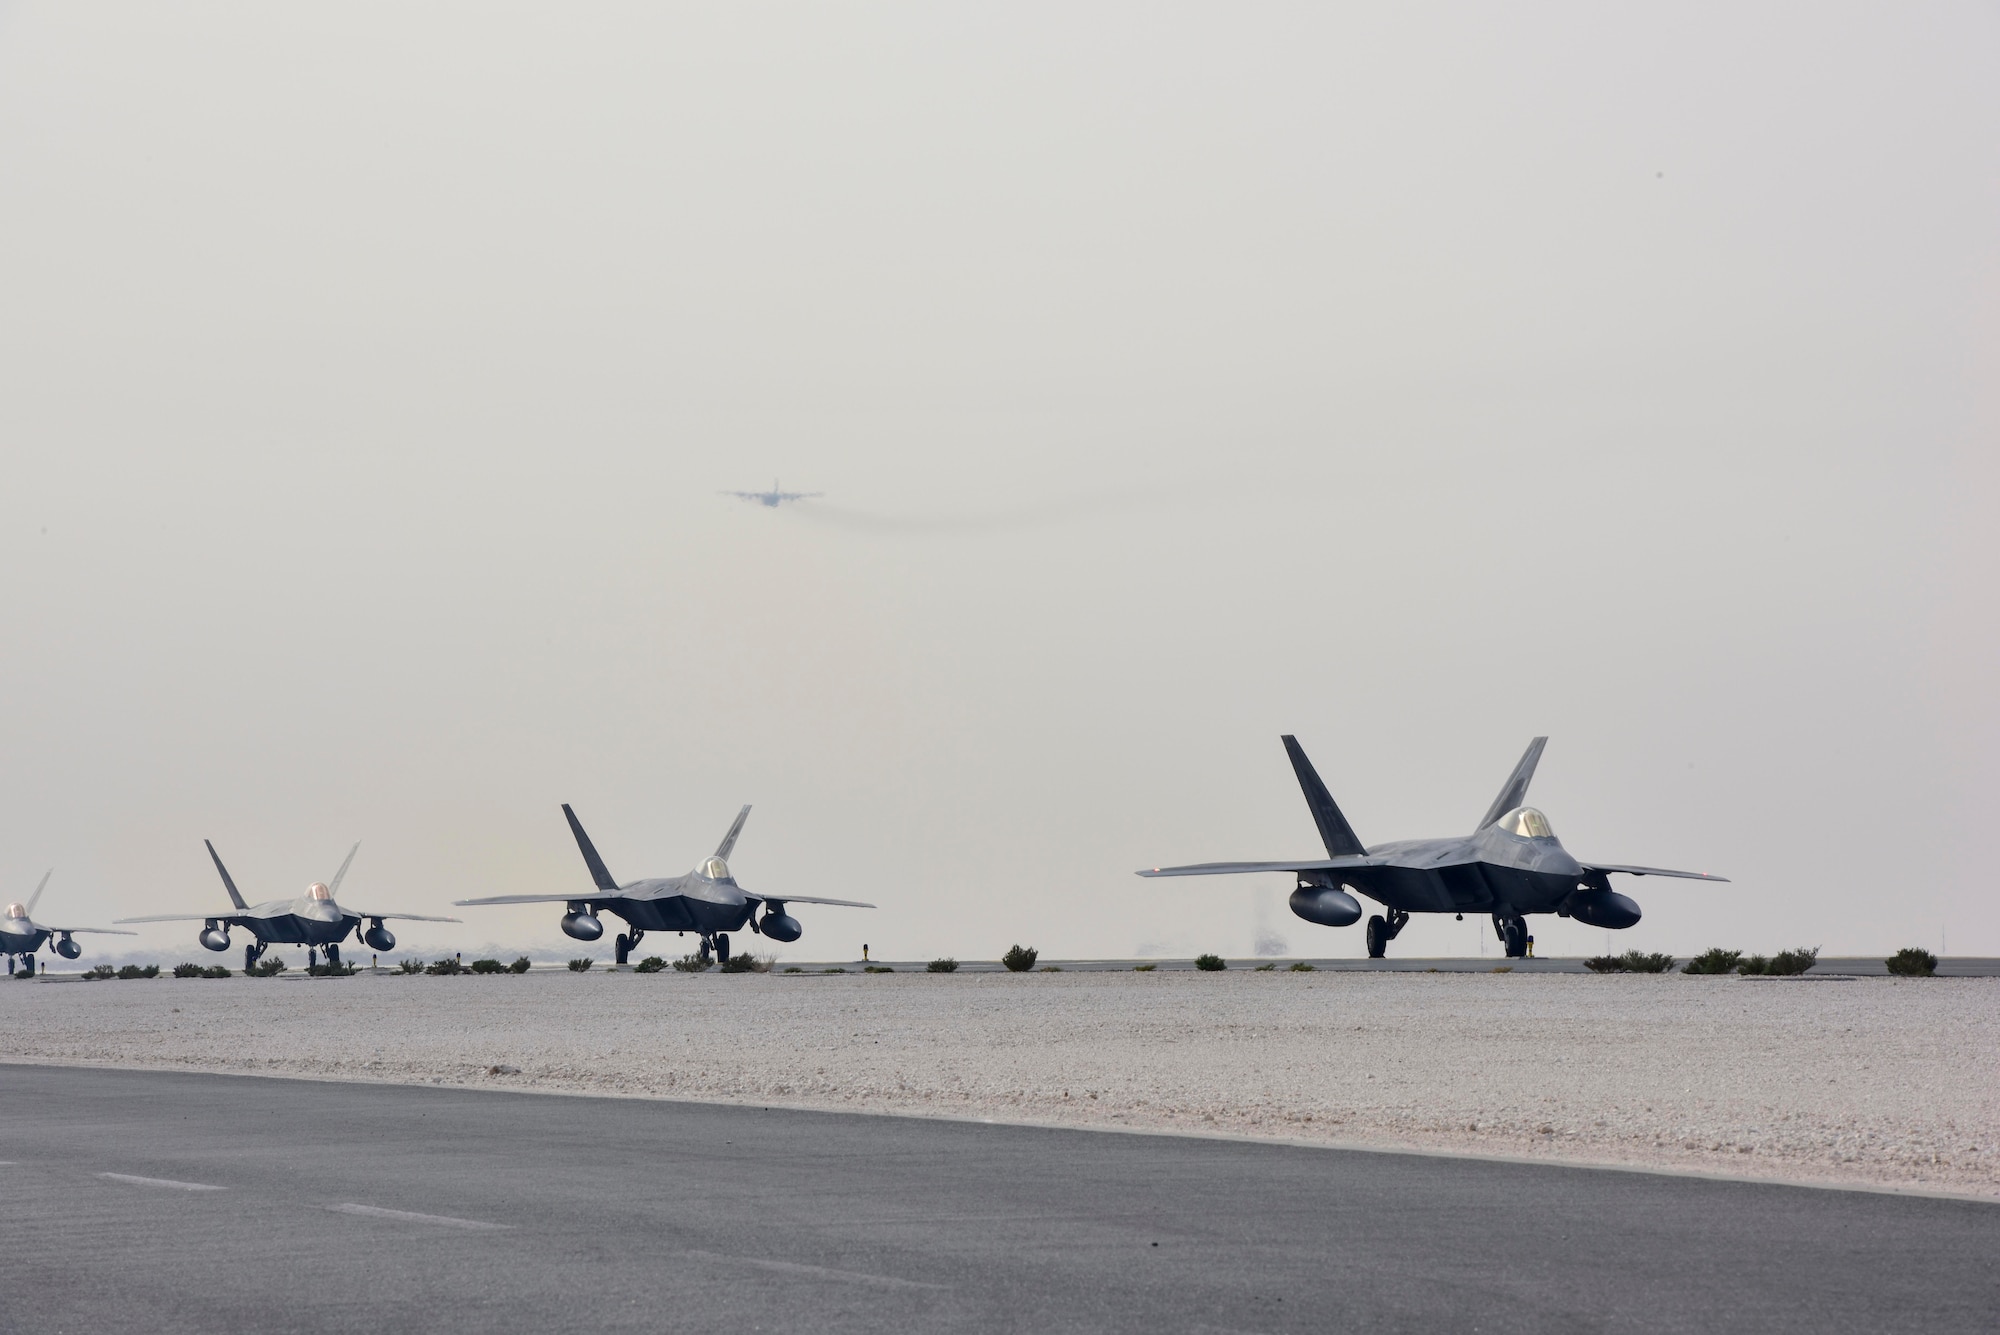 F-22 Raptors taxi to the runway at Al Udeid Air Base, Qatar on Feb. 1, 2020. The F-22 combines stealth, supercruise, maneuverability, and integrated avionics to provide air superiority throughout the U.S. Air Forces Central Command area of responsibility. (U.S. Air Force photo by Tech. Sgt. John Wilkes)